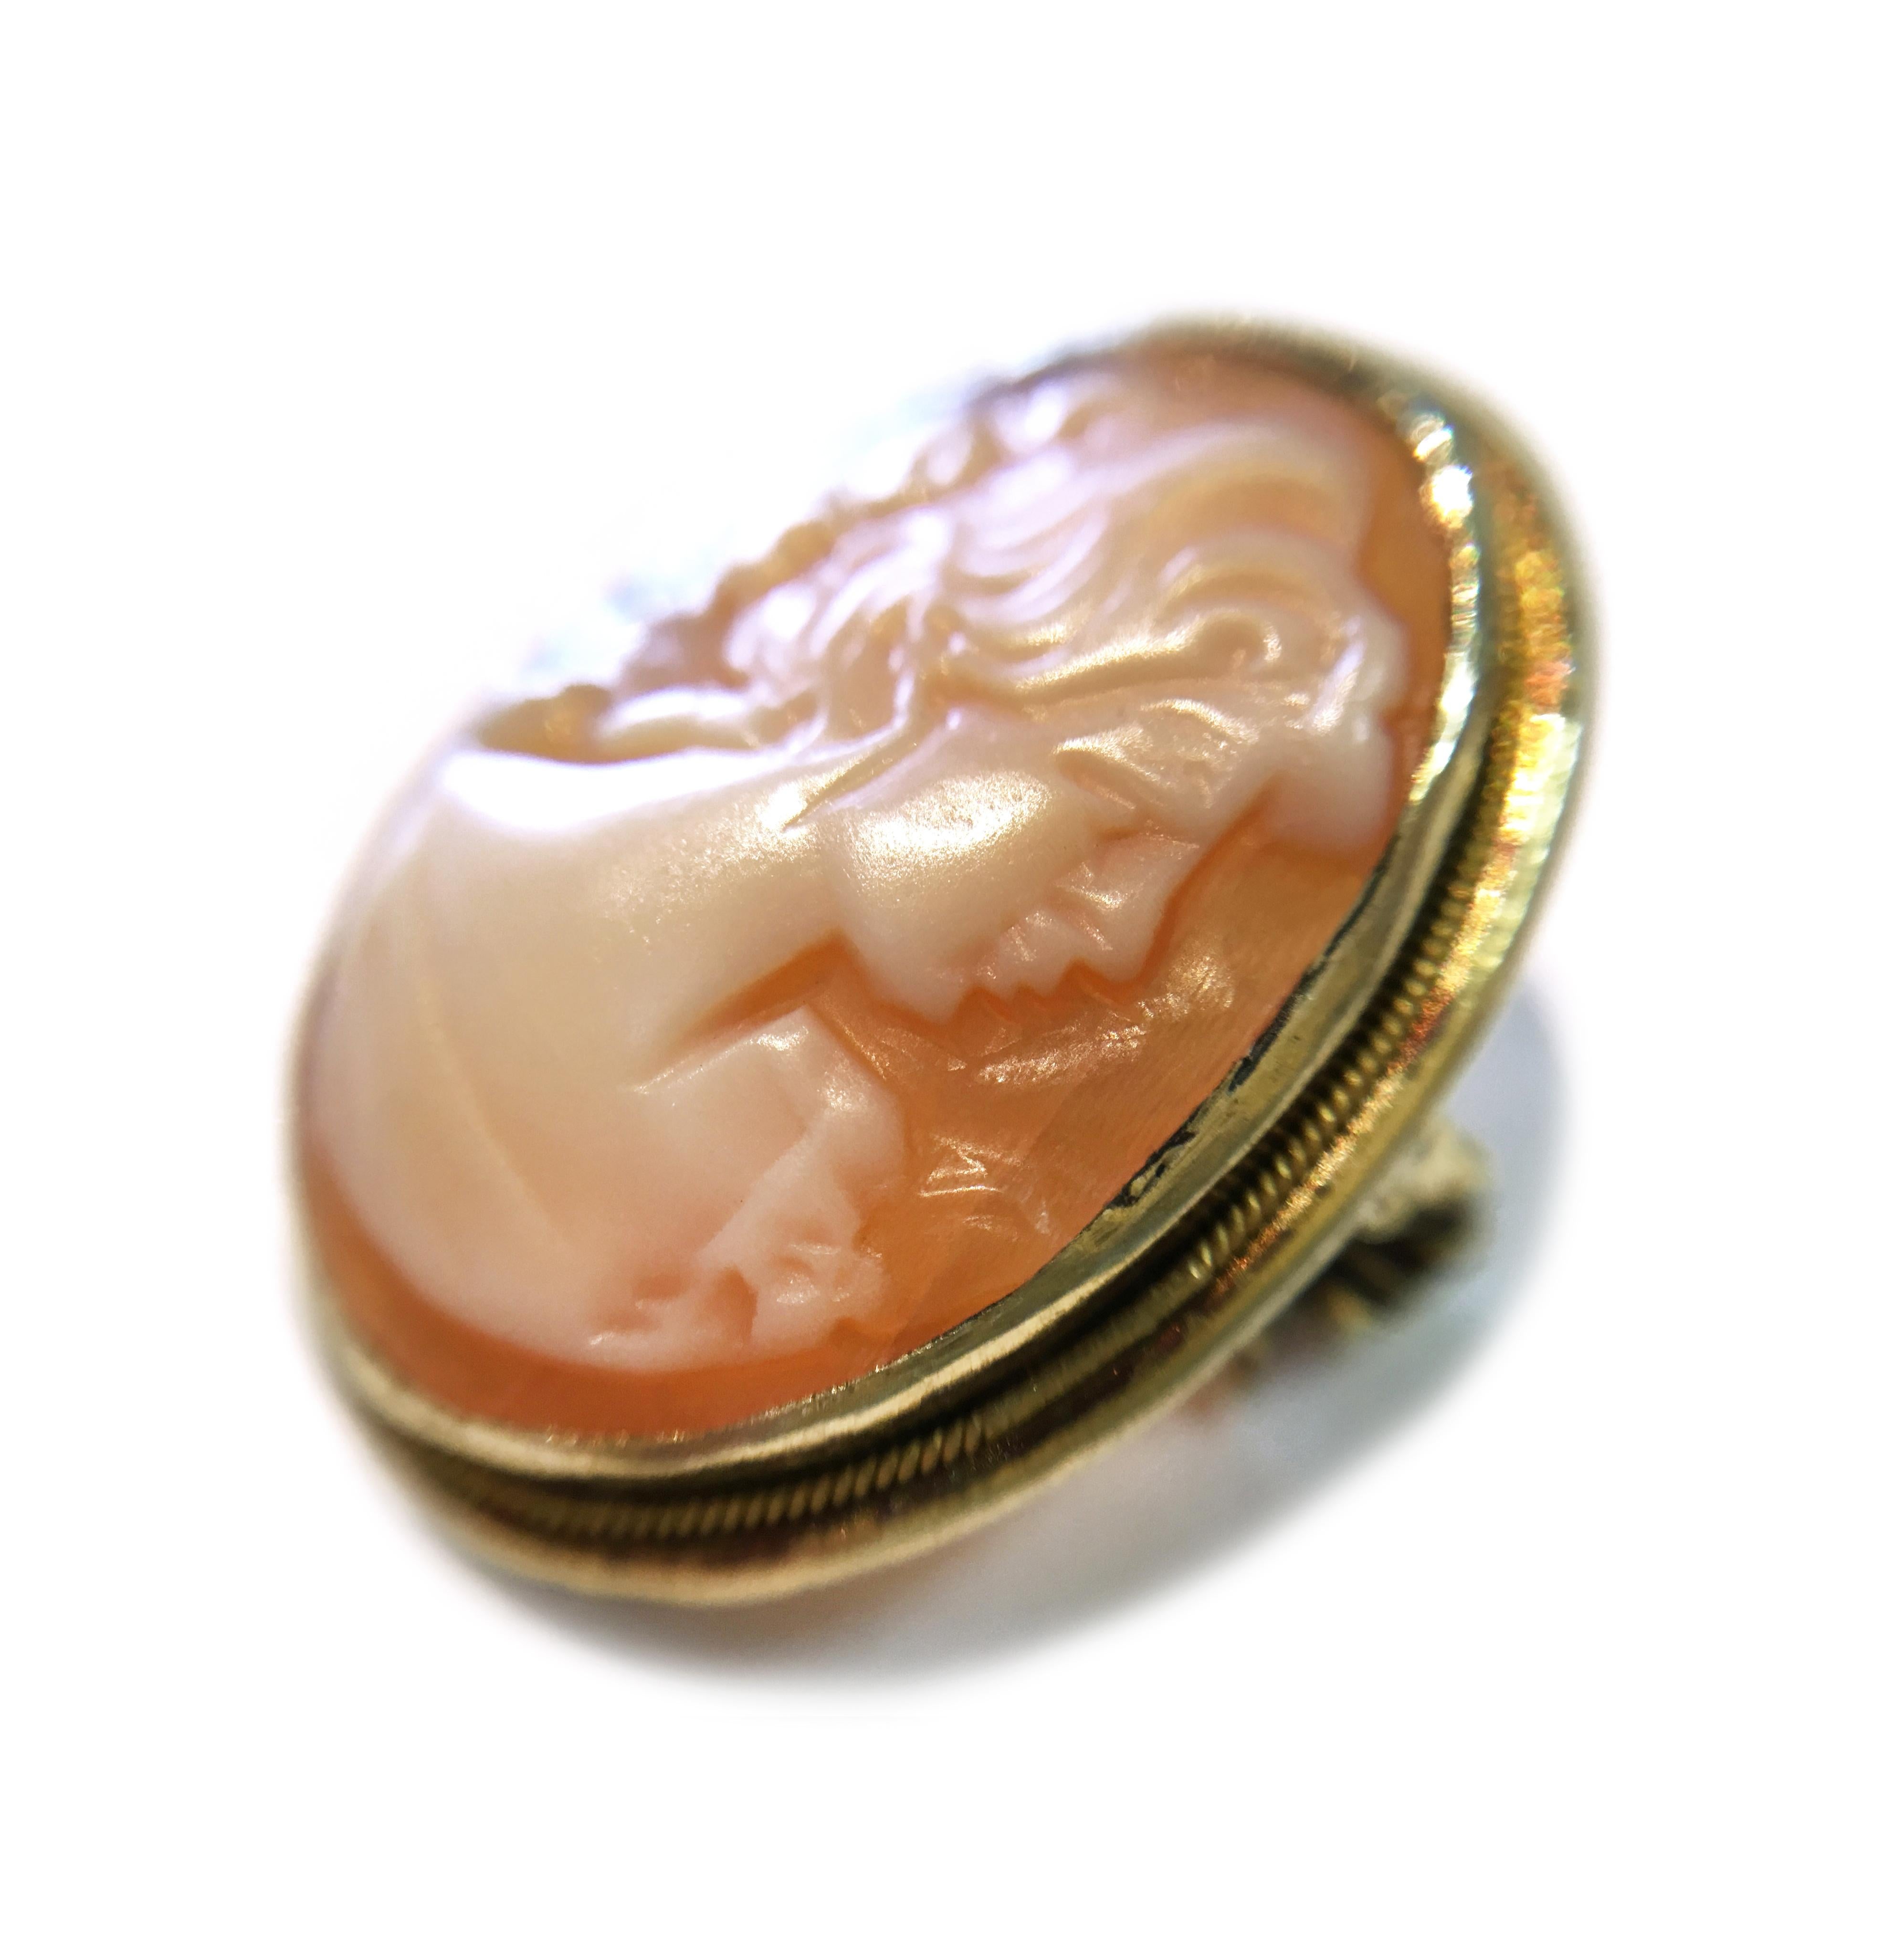 Vintage Italian 14 Karat Small Shell Cameo Brooch. Portrait of a lady with a flower on her collar. This is a petite yet lovely cameo that will work well as an accent piece to your favorite outfit. There is gold bezel with a milgrain all around the